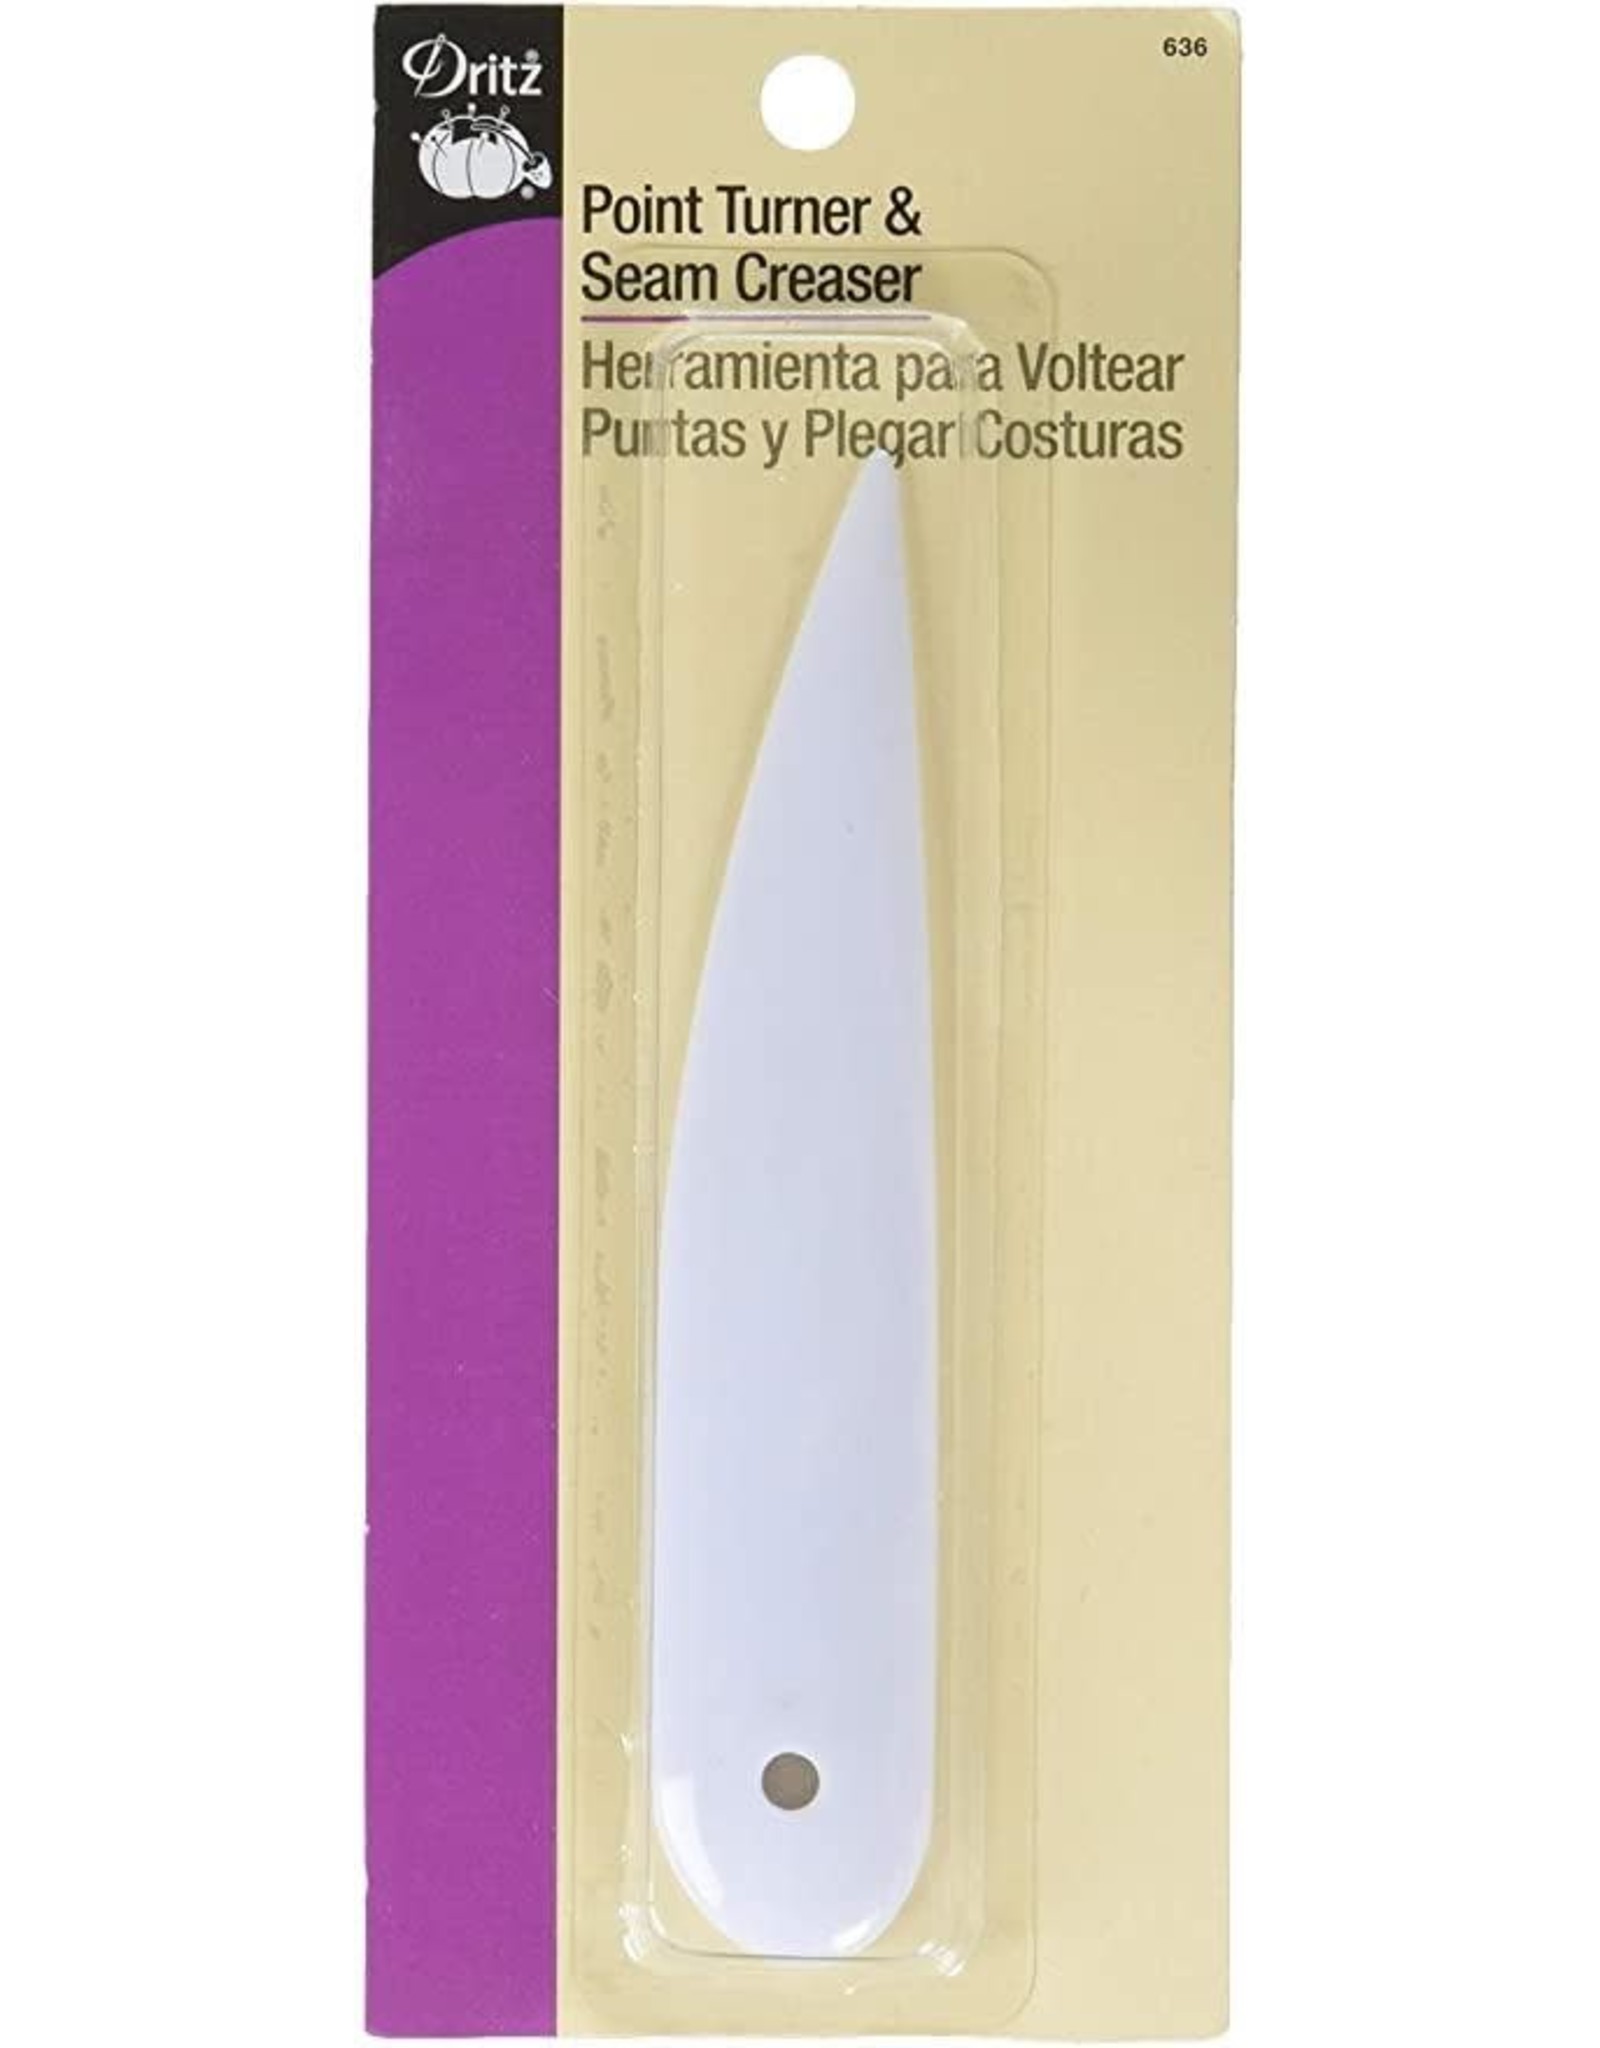 Dritz Point Turner and Seam Creaser